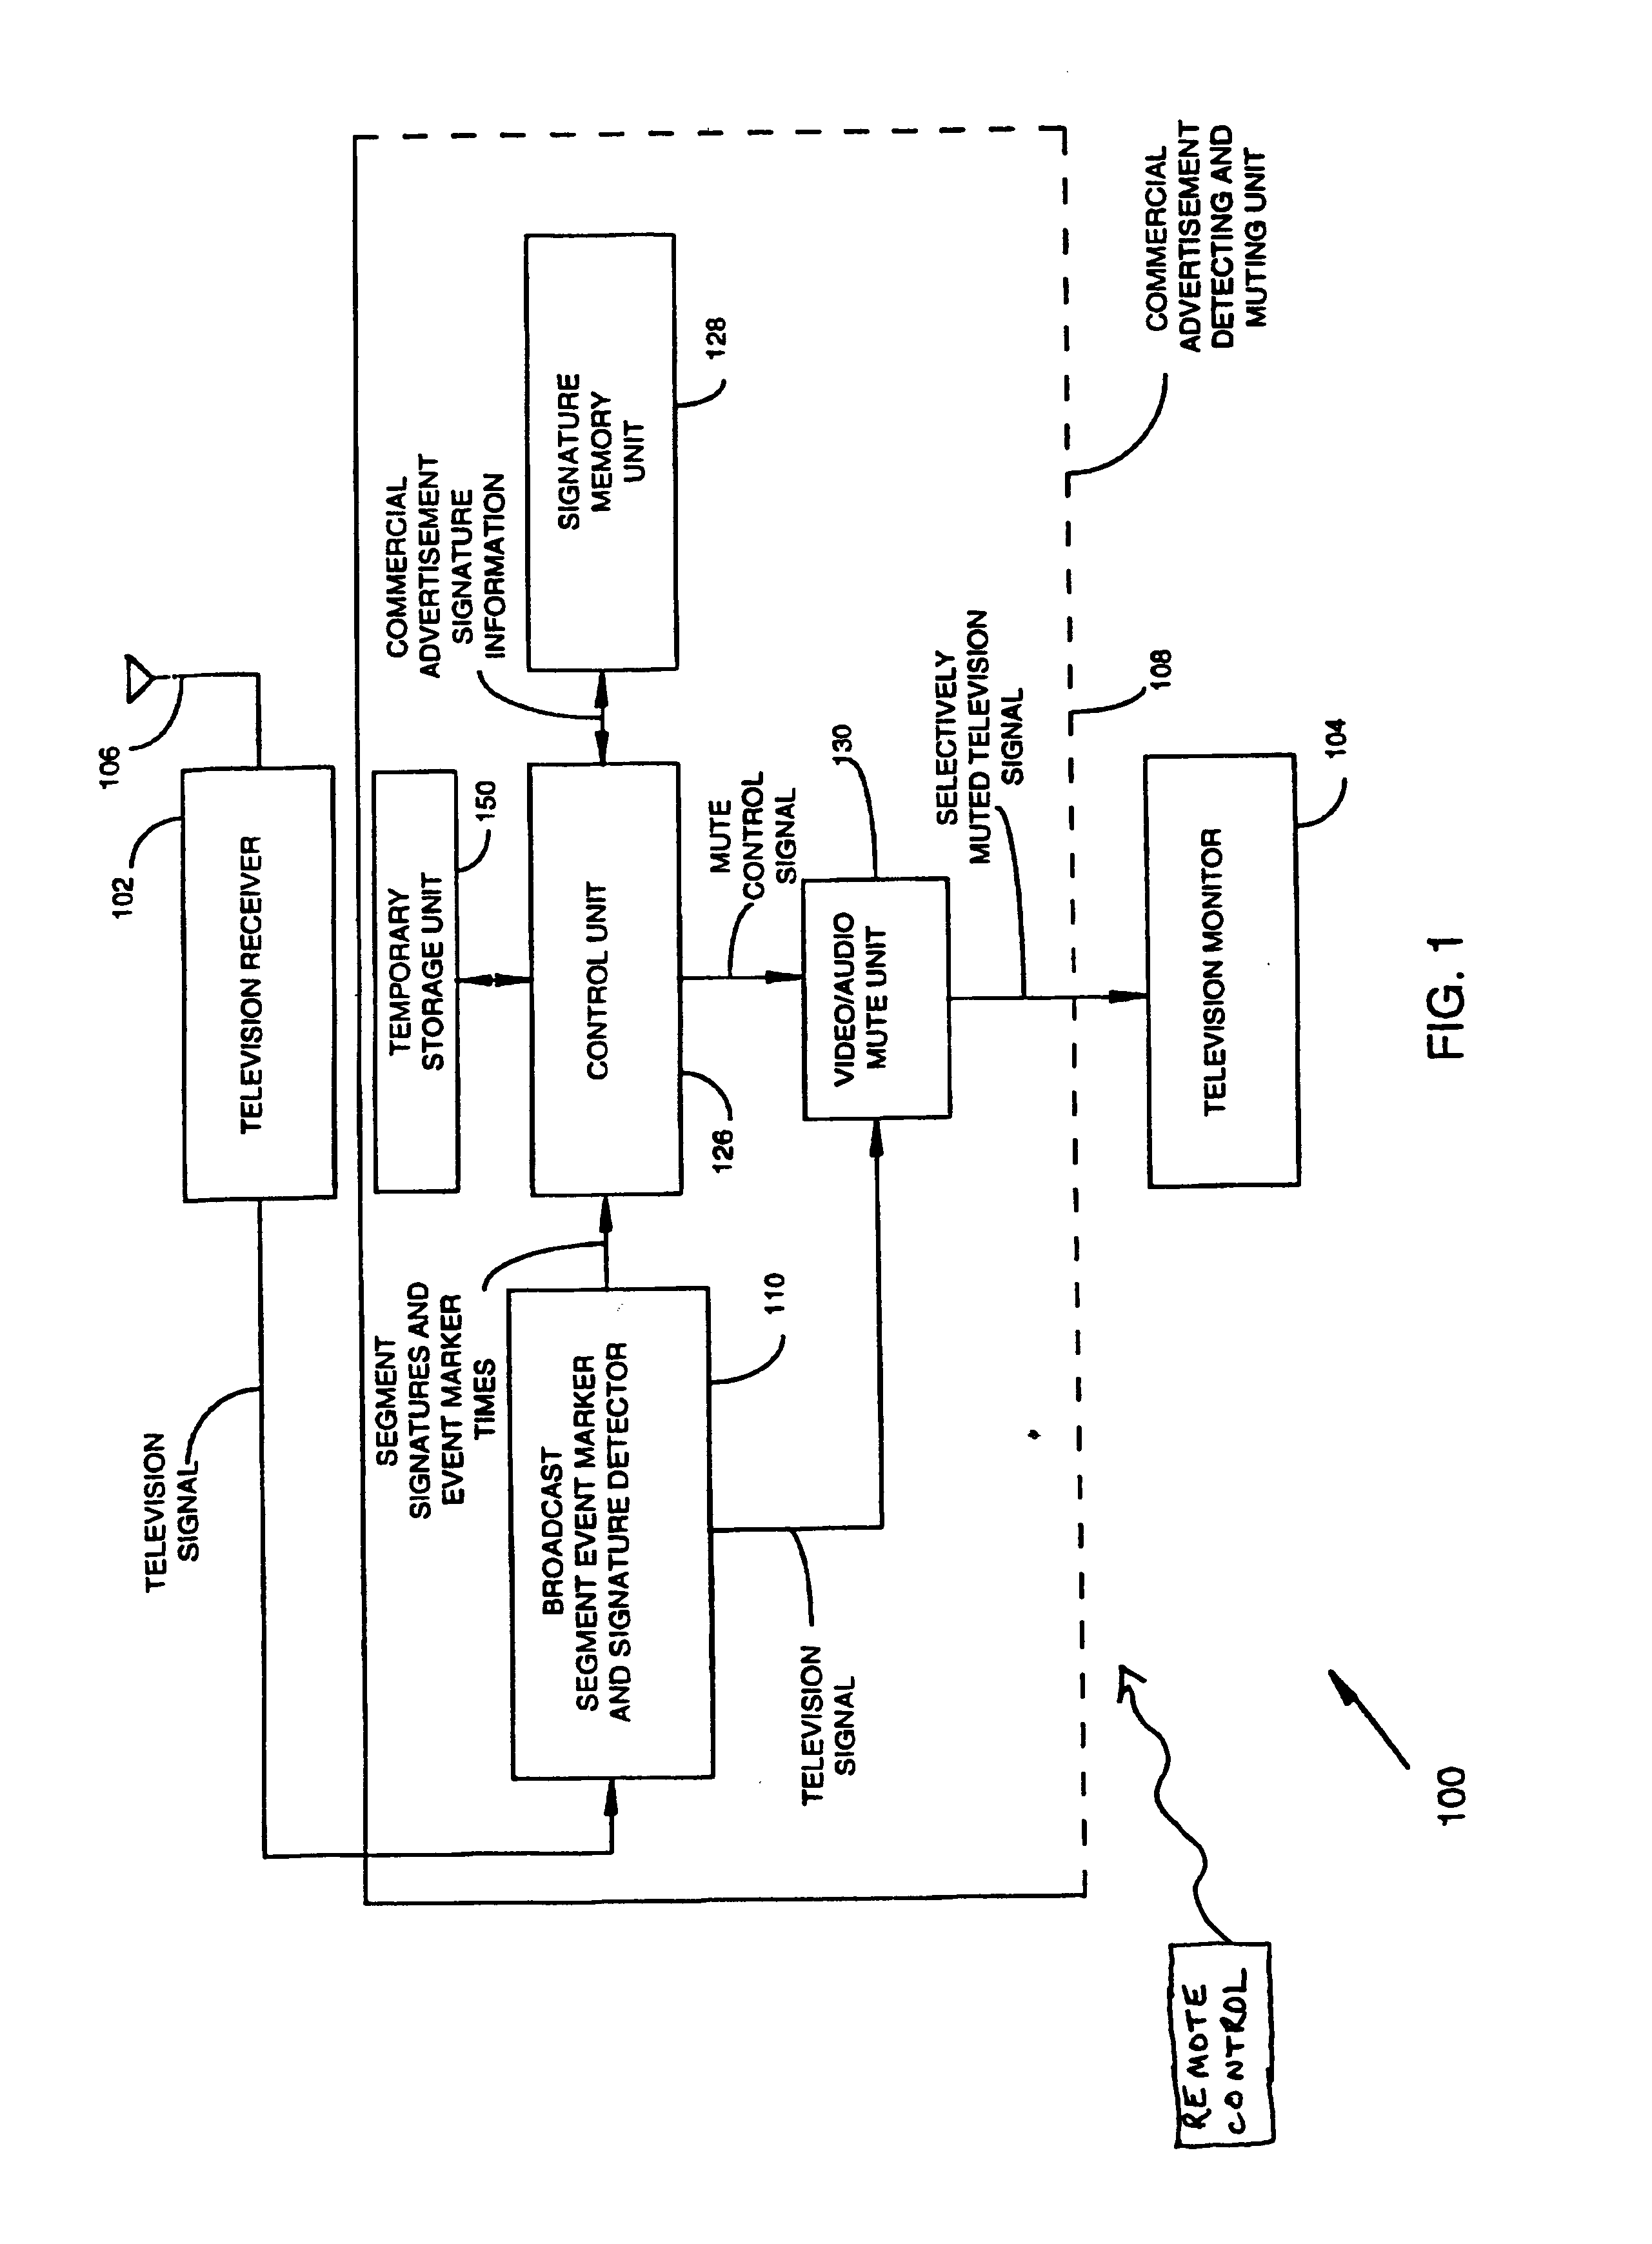 Method and apparatus for selectively altering a television video signal in real-time